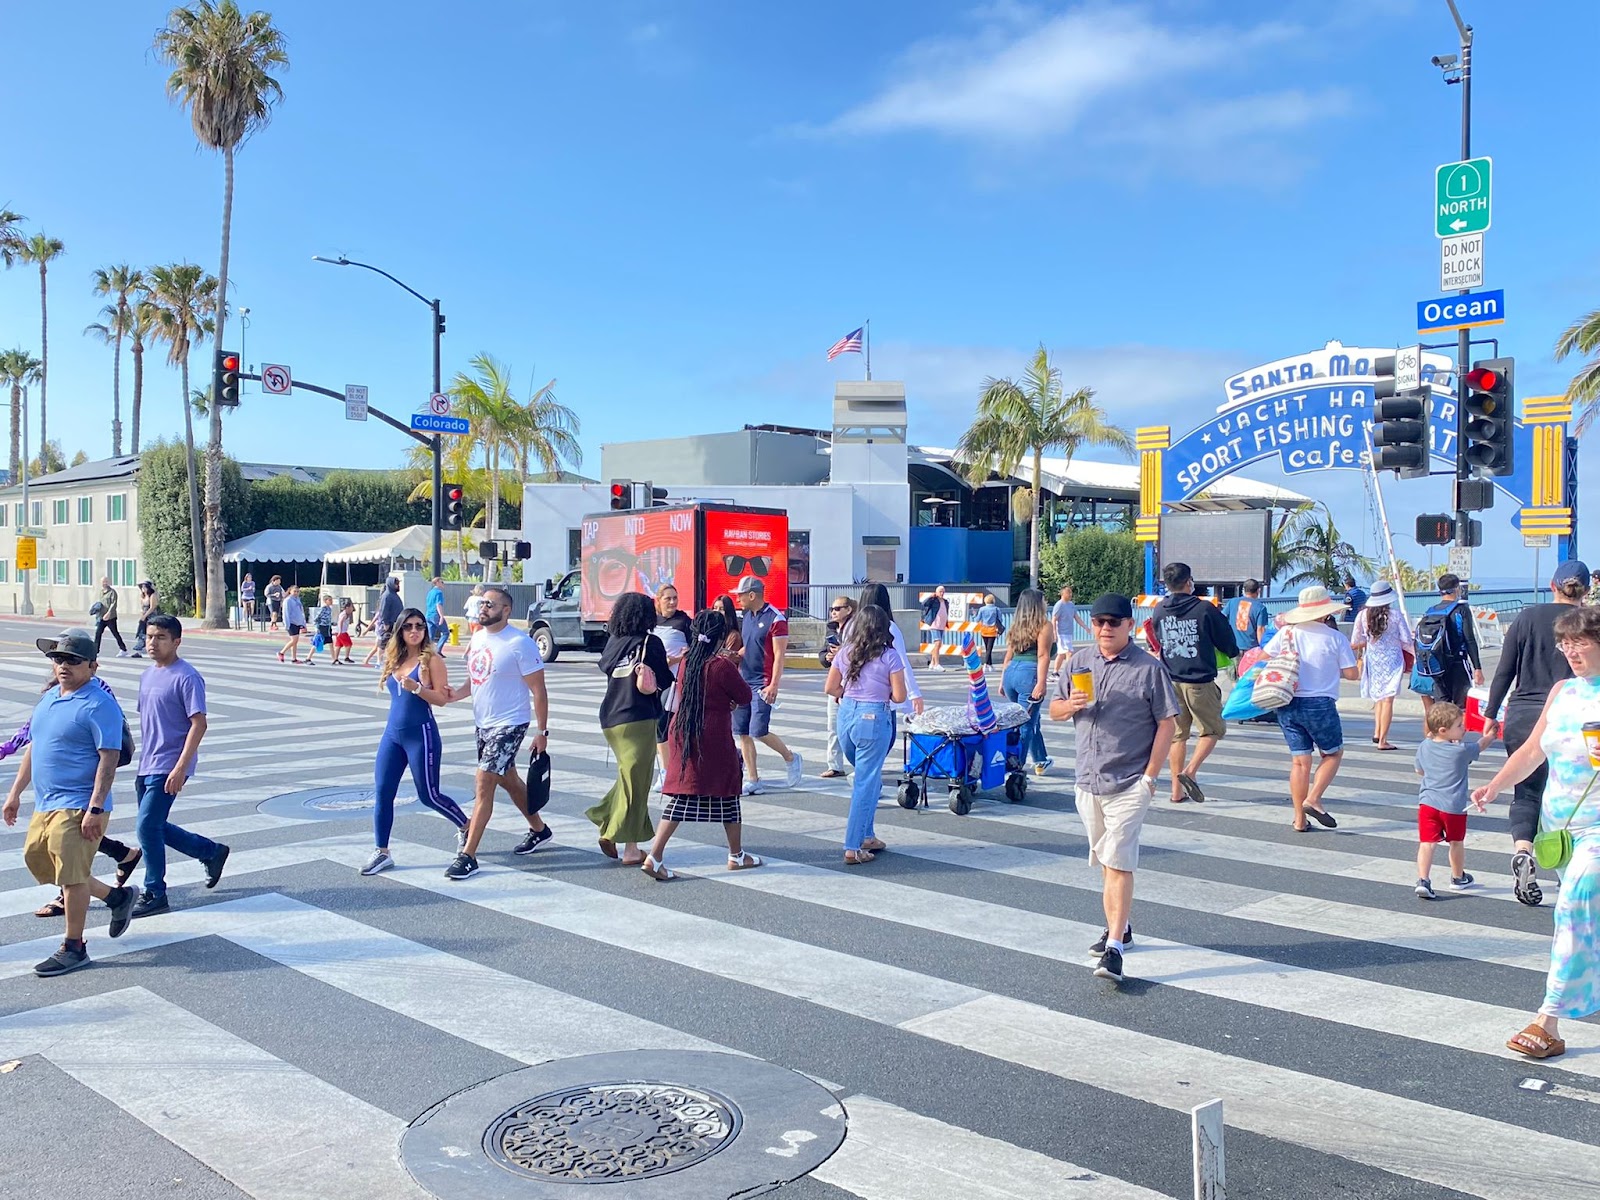 The Image highlights Mobile Billboards Are Better Option to Traditional Billboards in Pedestrians crossing street at Santa Monica, California.